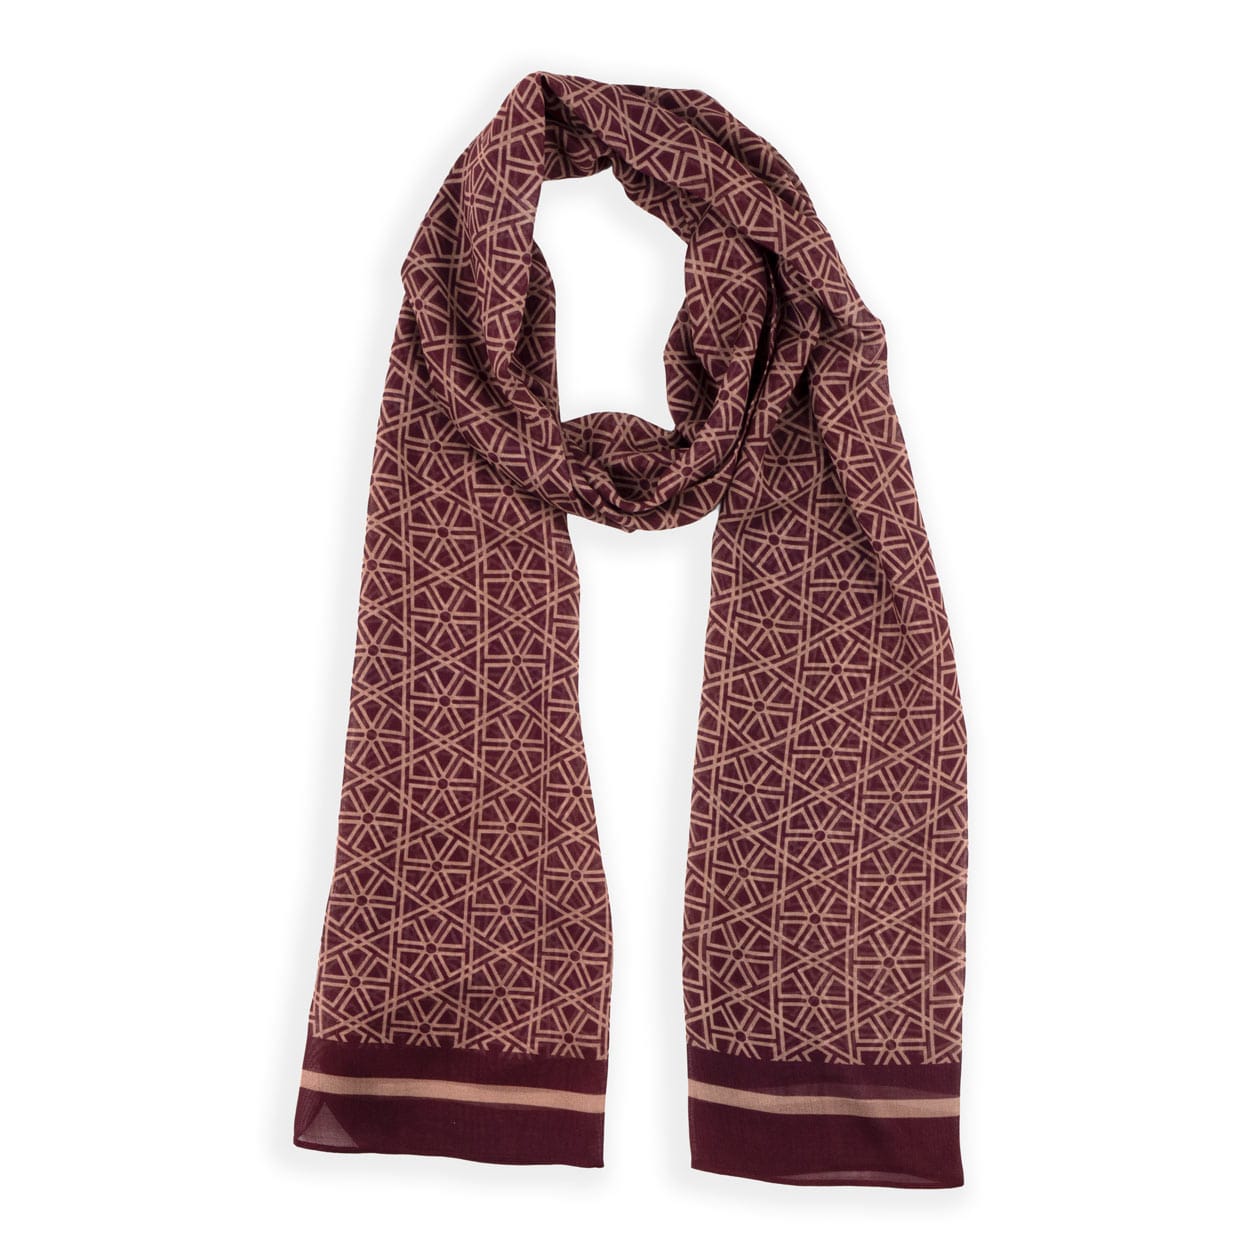 Red and brown neck scarf